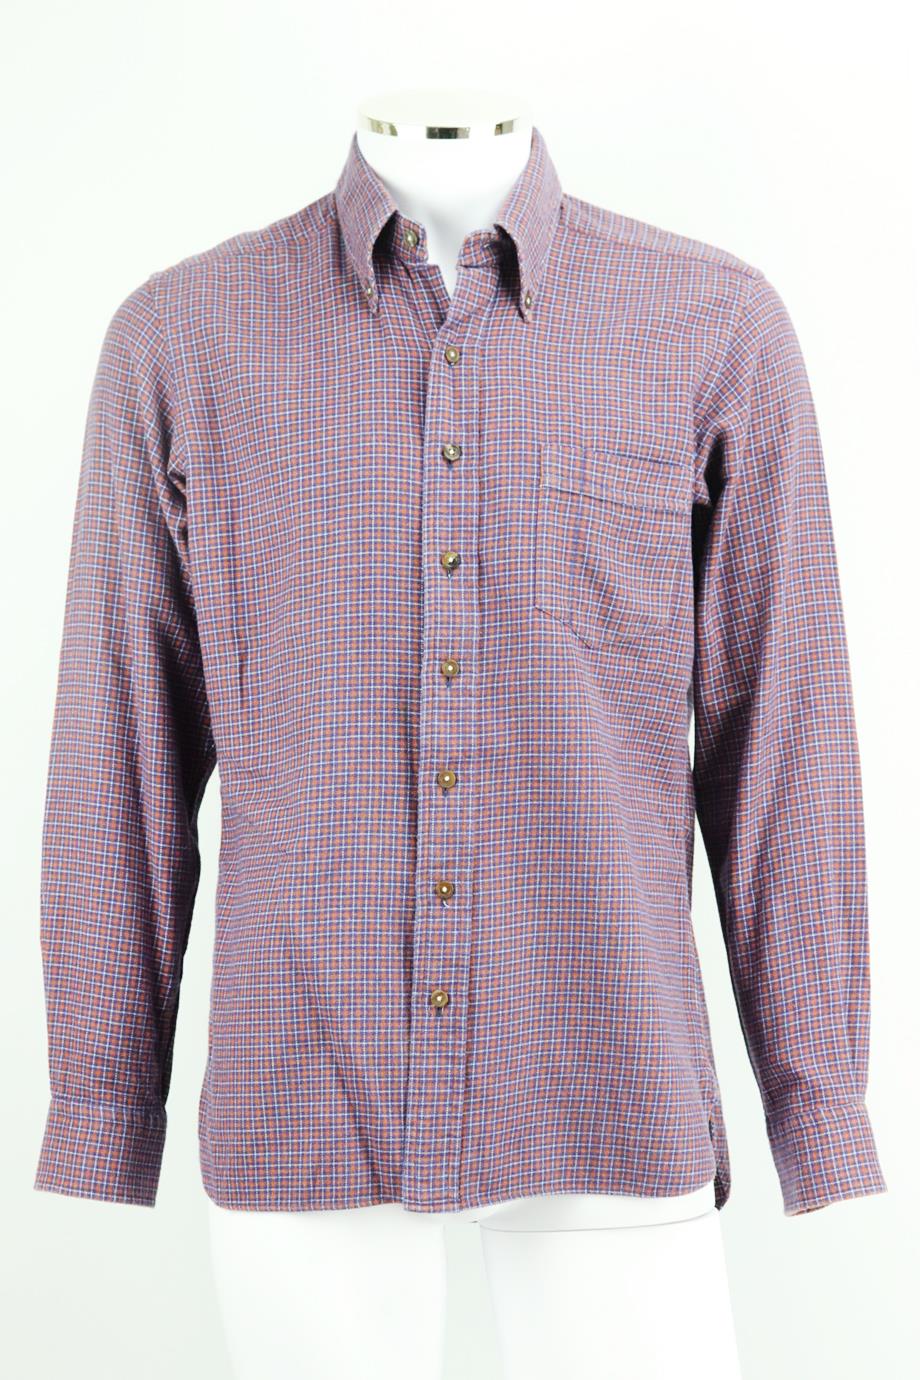 THOM SWEENEY MEN'S CHECKED COTTON FLANNEL SHIRT IT 52 UK/US CHEST 42